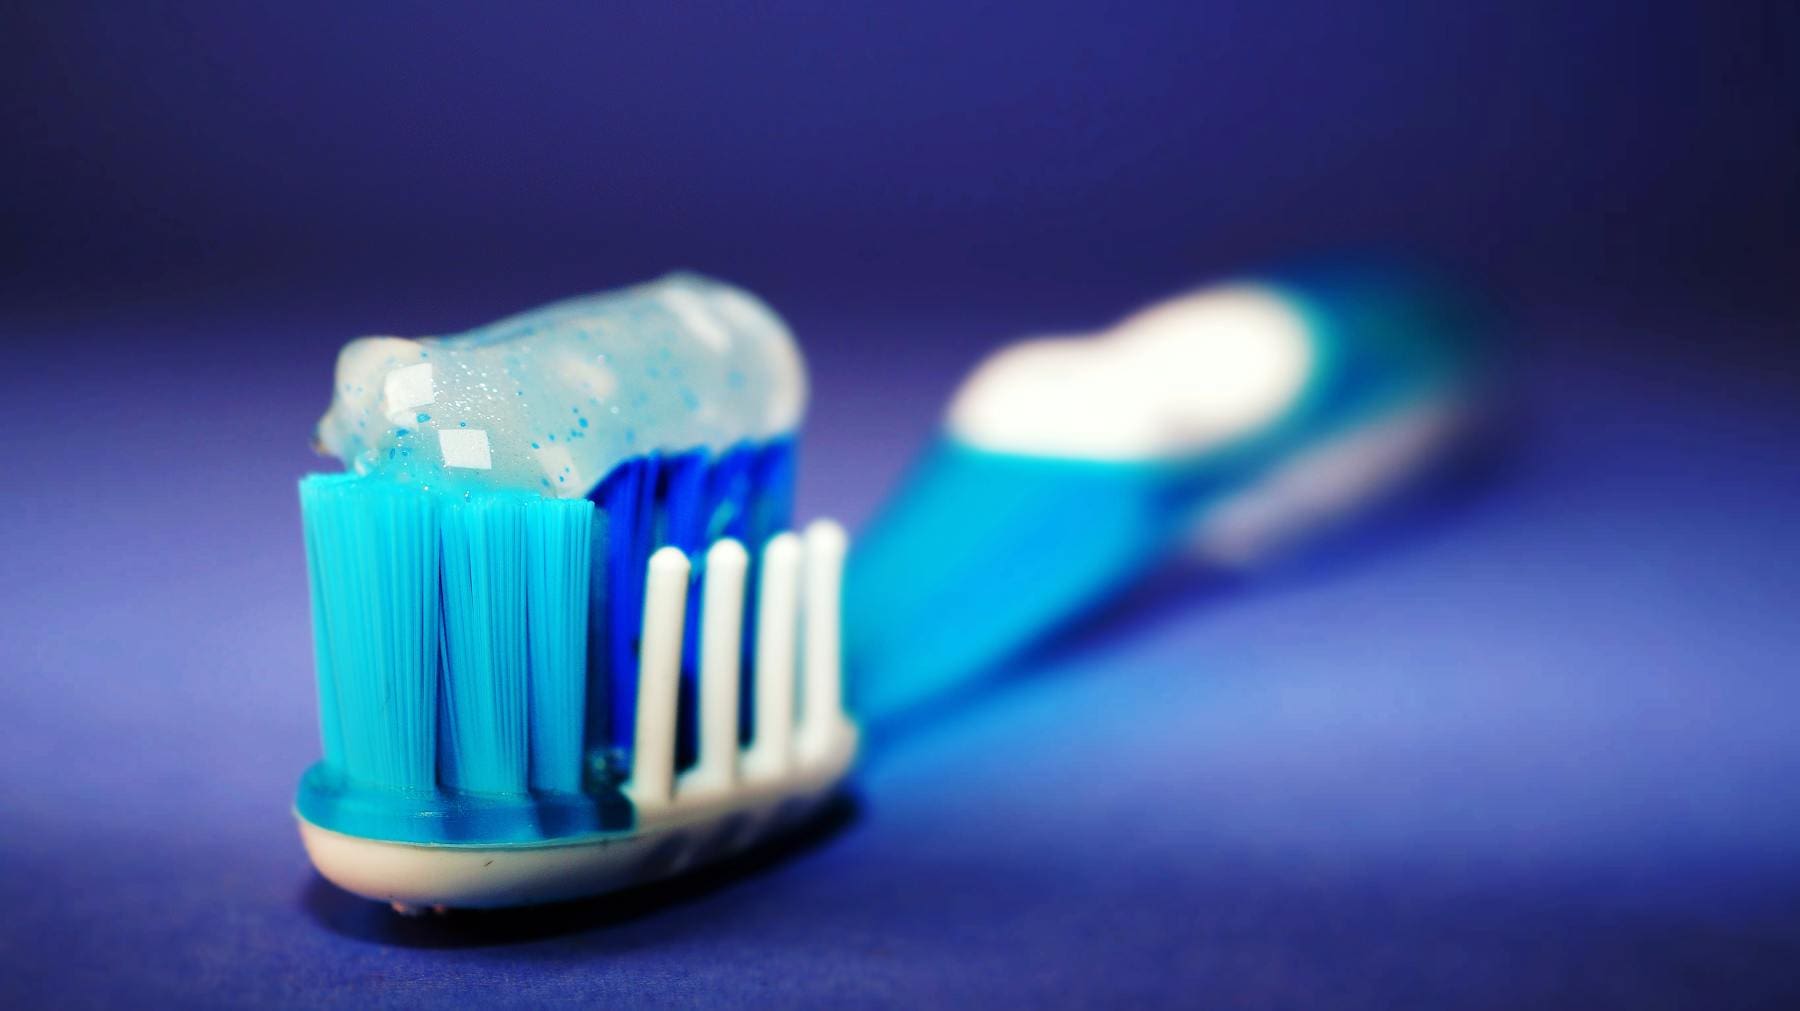 Toothbrush With Toothpaste on Bristles - Trade Winds Dental